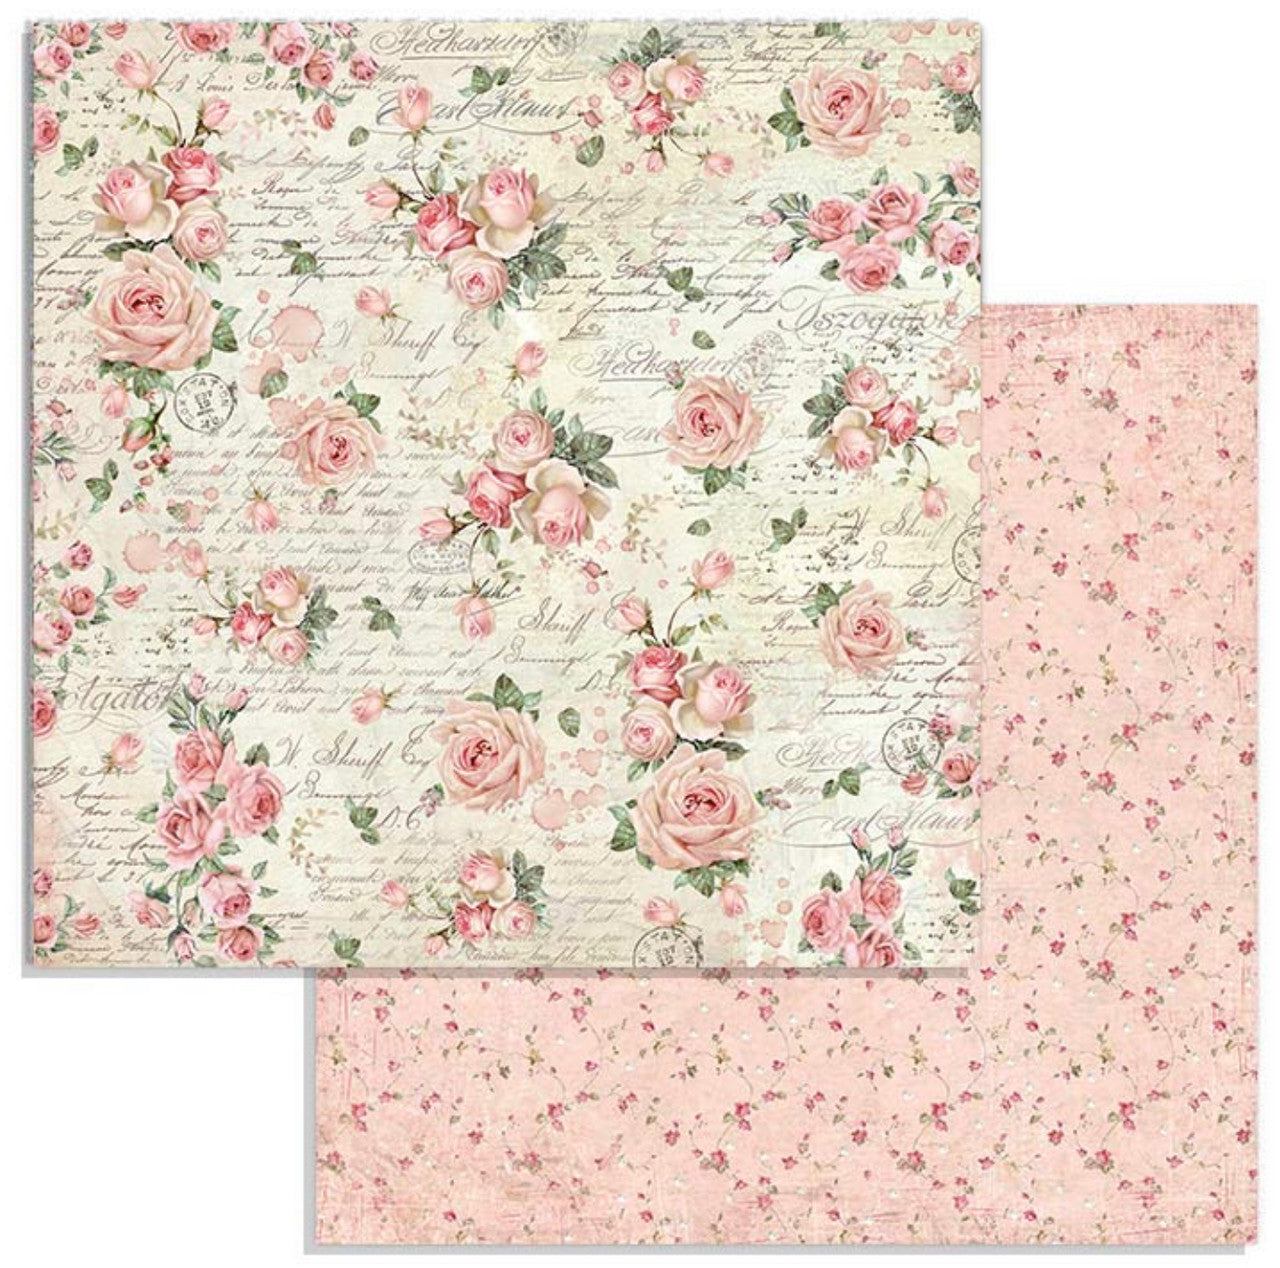 Stamperia Pink Christmas Paper Pack 8” x 8”